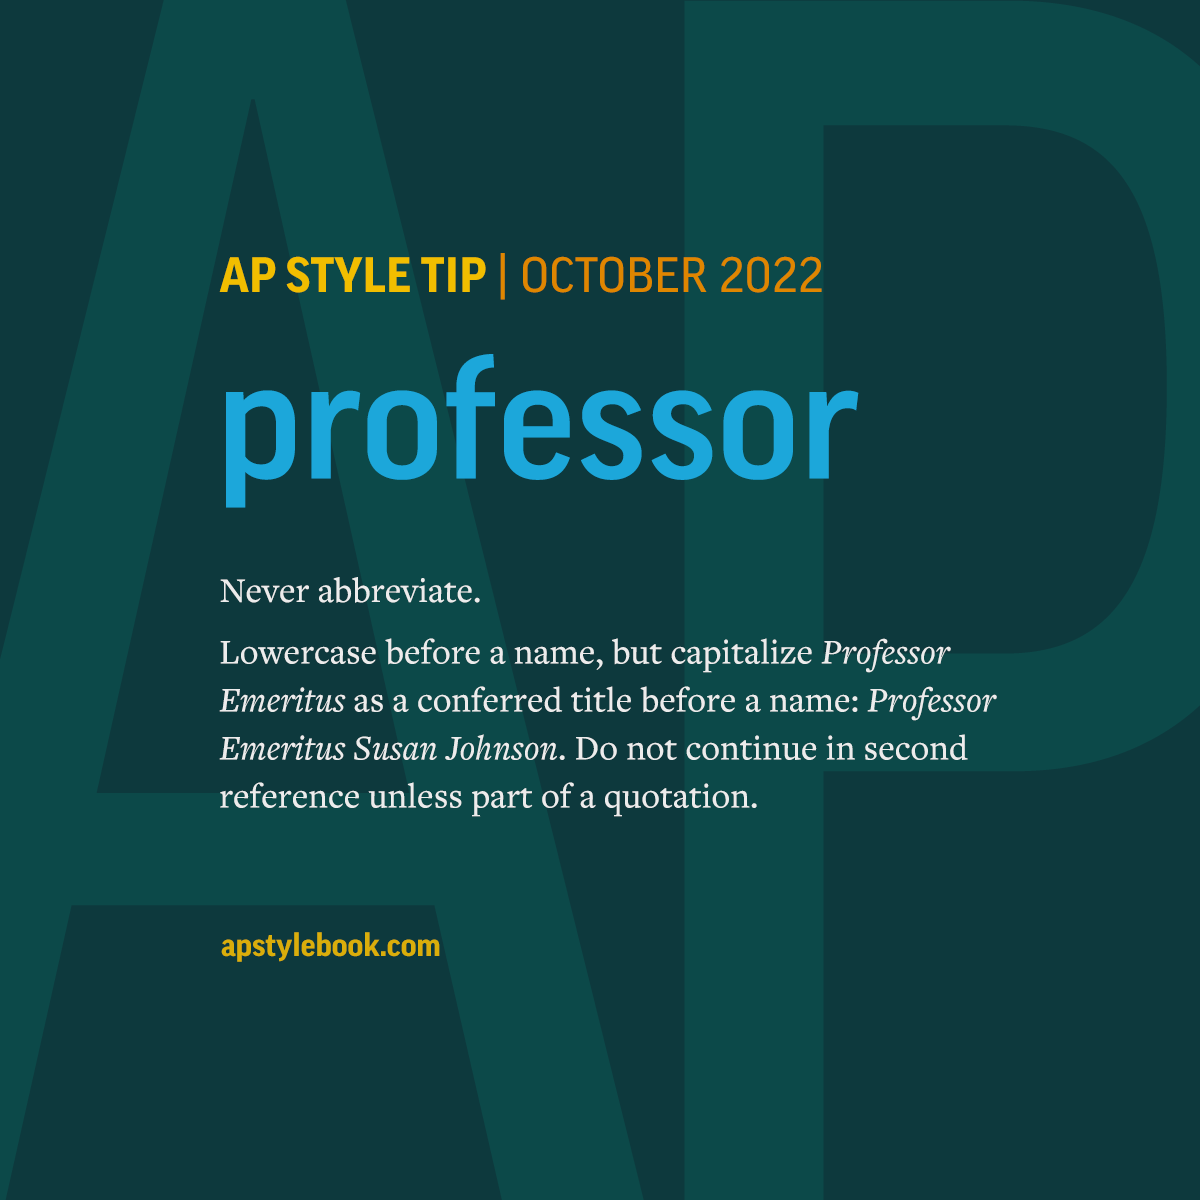 Never abbreviate professor. Lowercase professor before a name, but capitalize Professor Emeritus as a conferred title before a name: Professor Emeritus Susan Johnson. Do not continue in second reference unless part of a quotation.